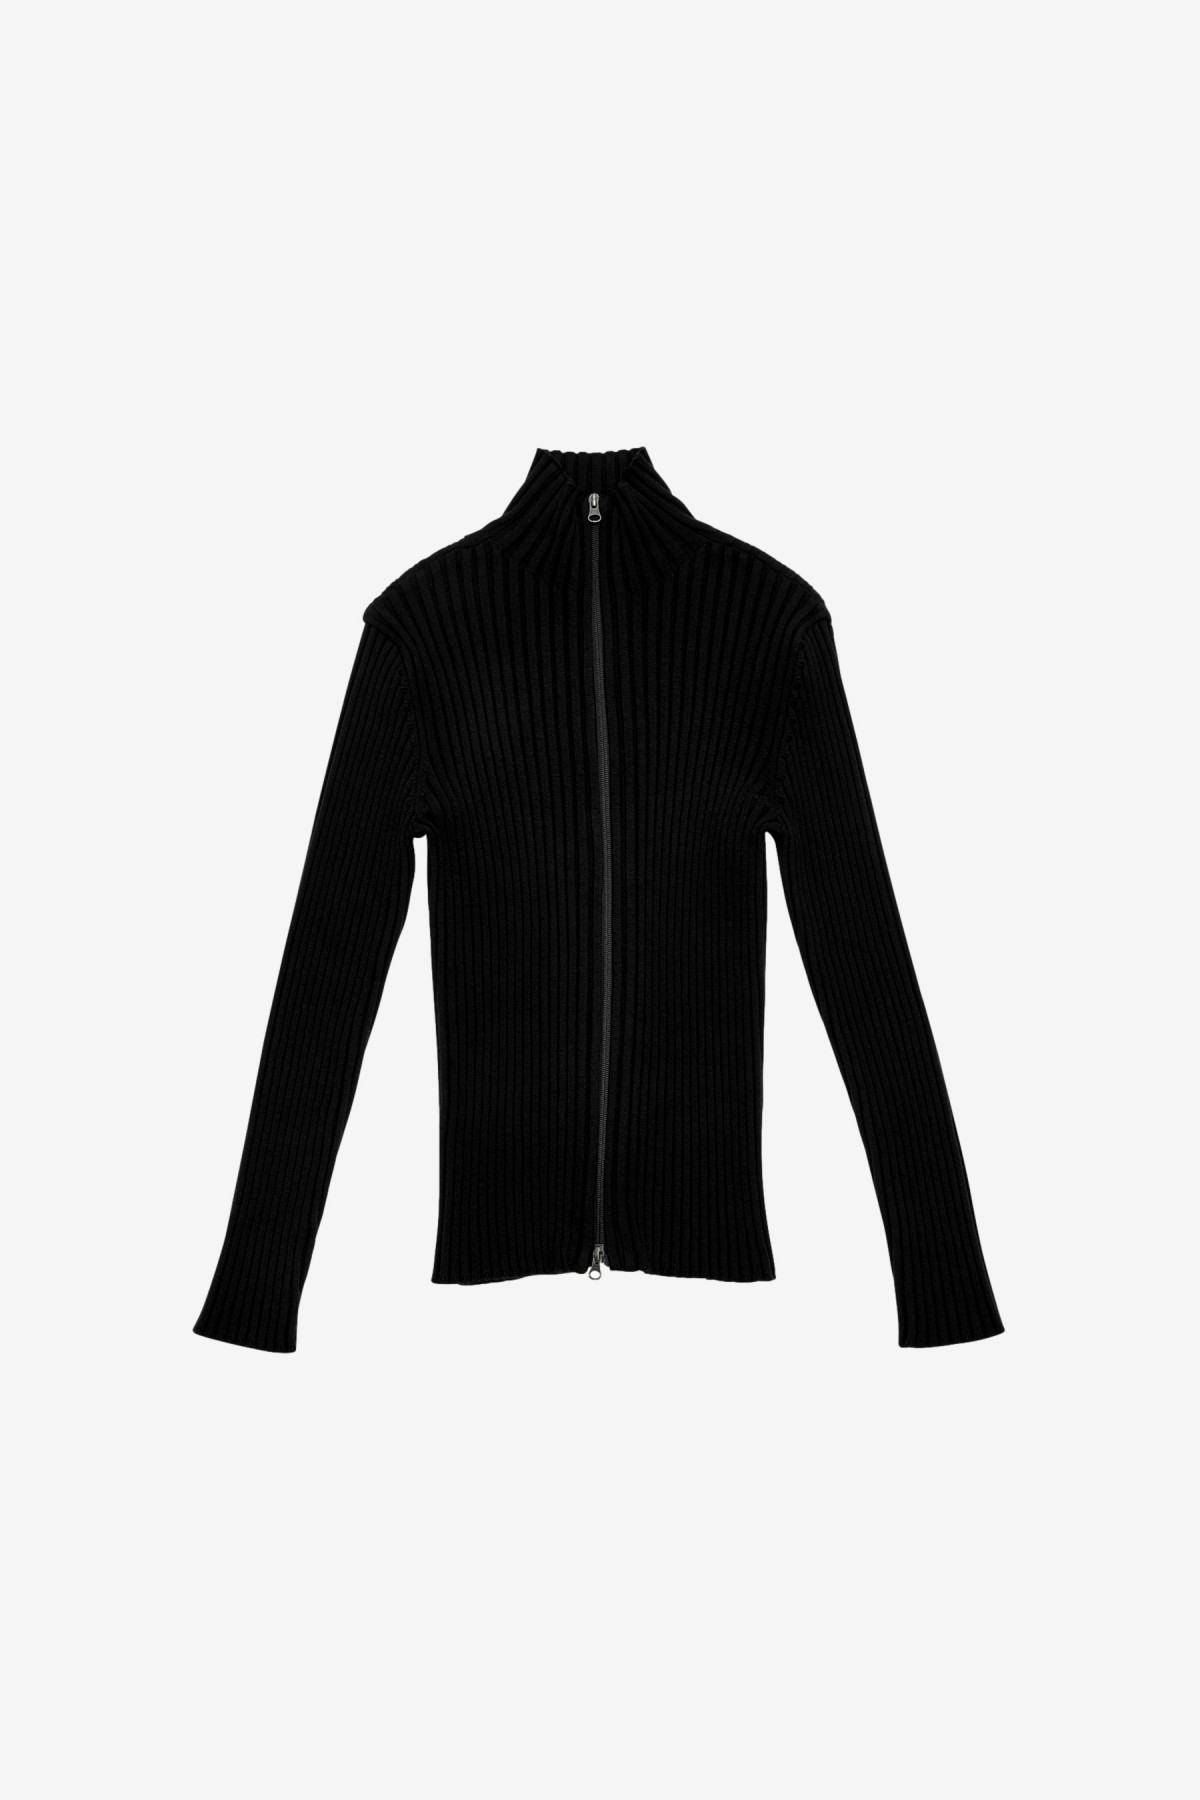 Amomento Ribbed High Neck Cardigan in Black